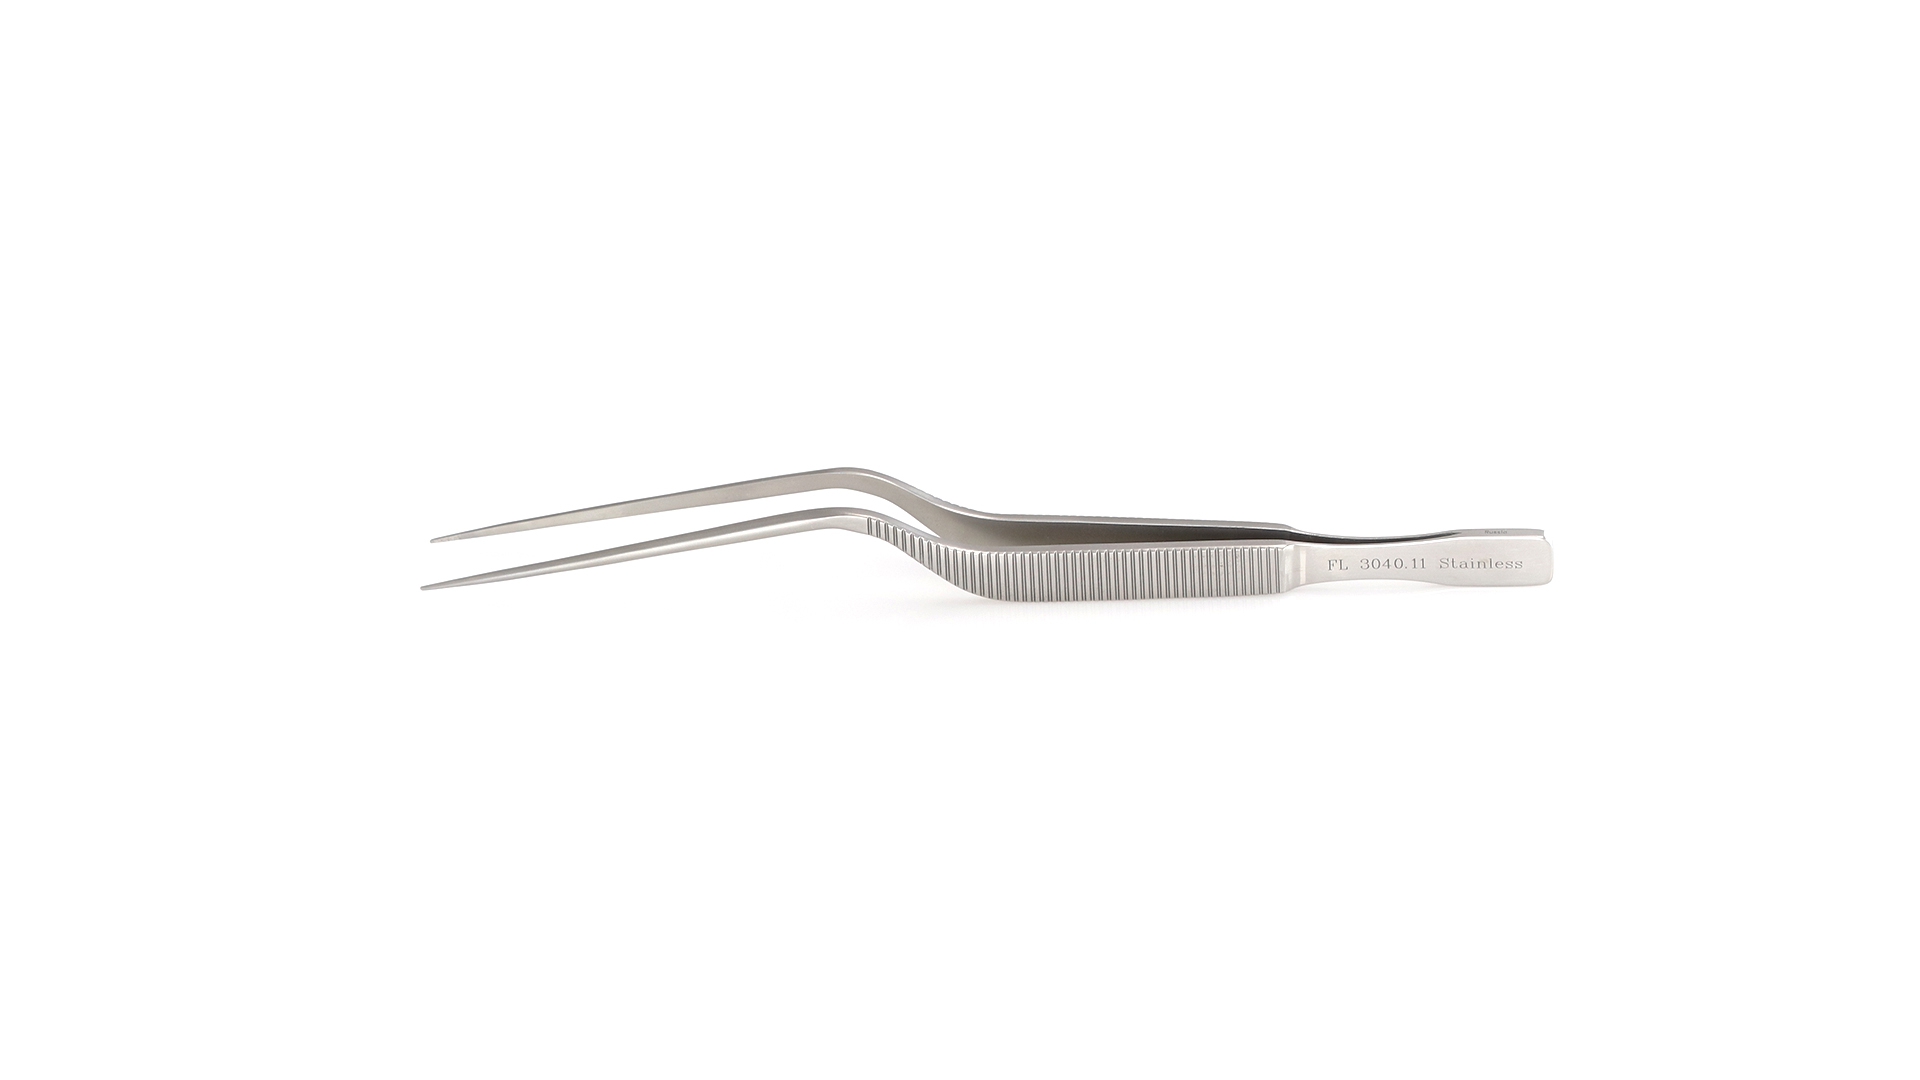 Micro Forceps - Straight 0.75mm blunt TC Coated tips